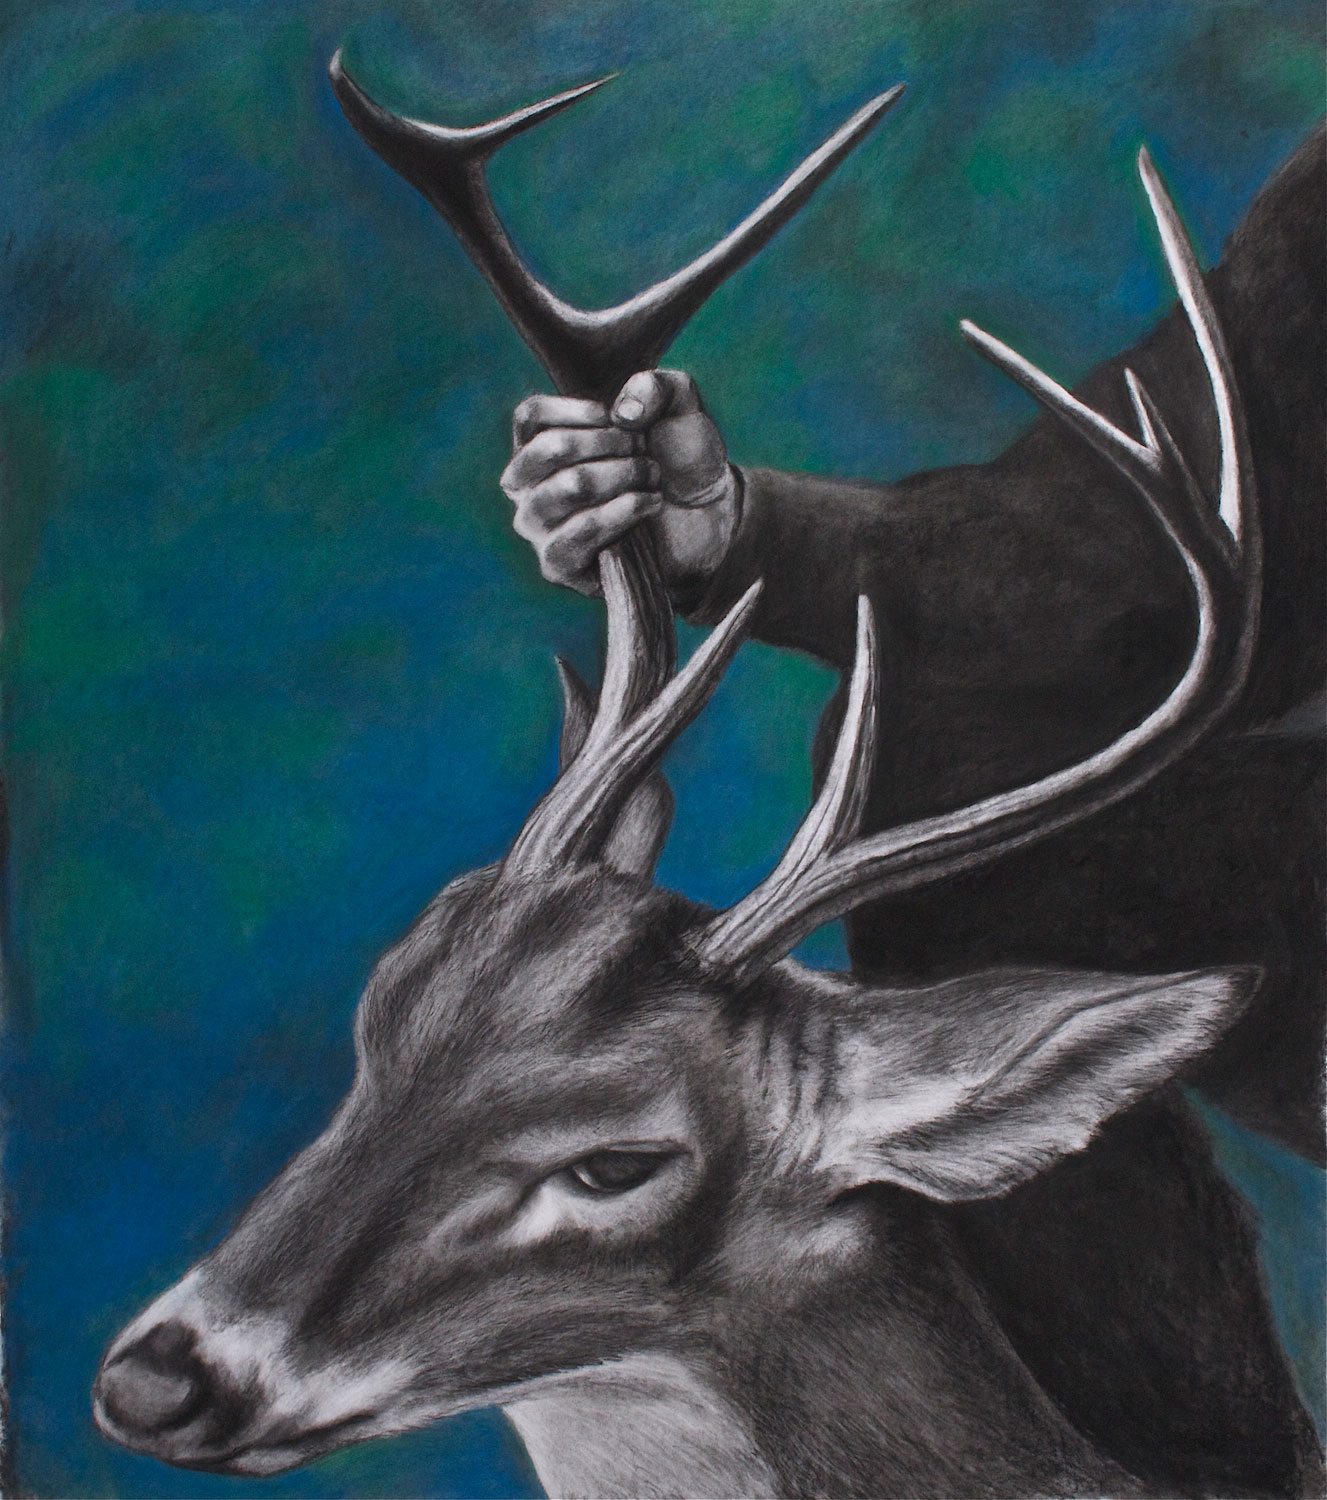 Jackie Skrzynski, Deer, Lifted, 2012. Charcoal and pastel, 46 x 40 in.